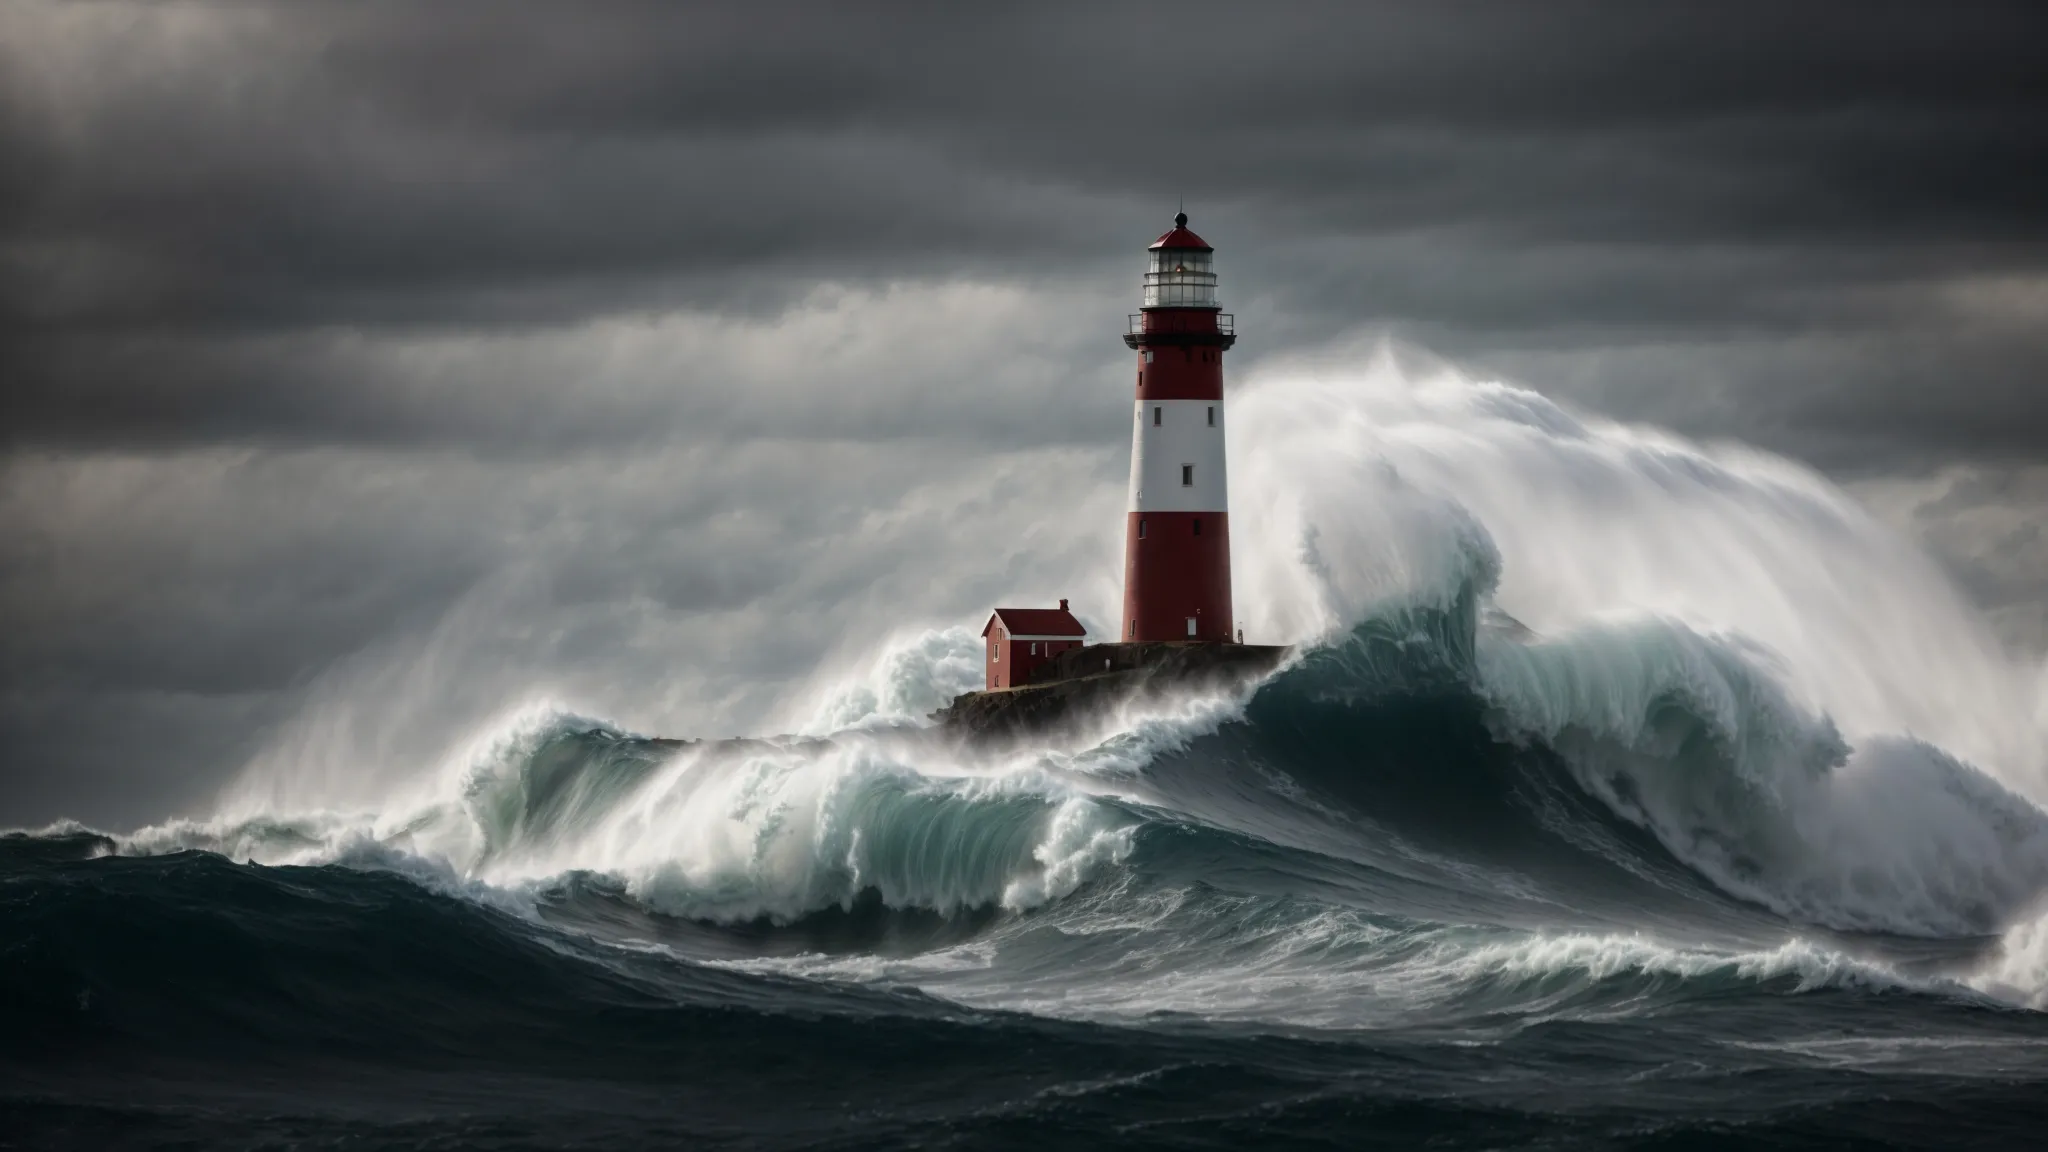 a towering lighthouse stands firm amidst a tumultuous sea, casting a guiding light over dark waves.